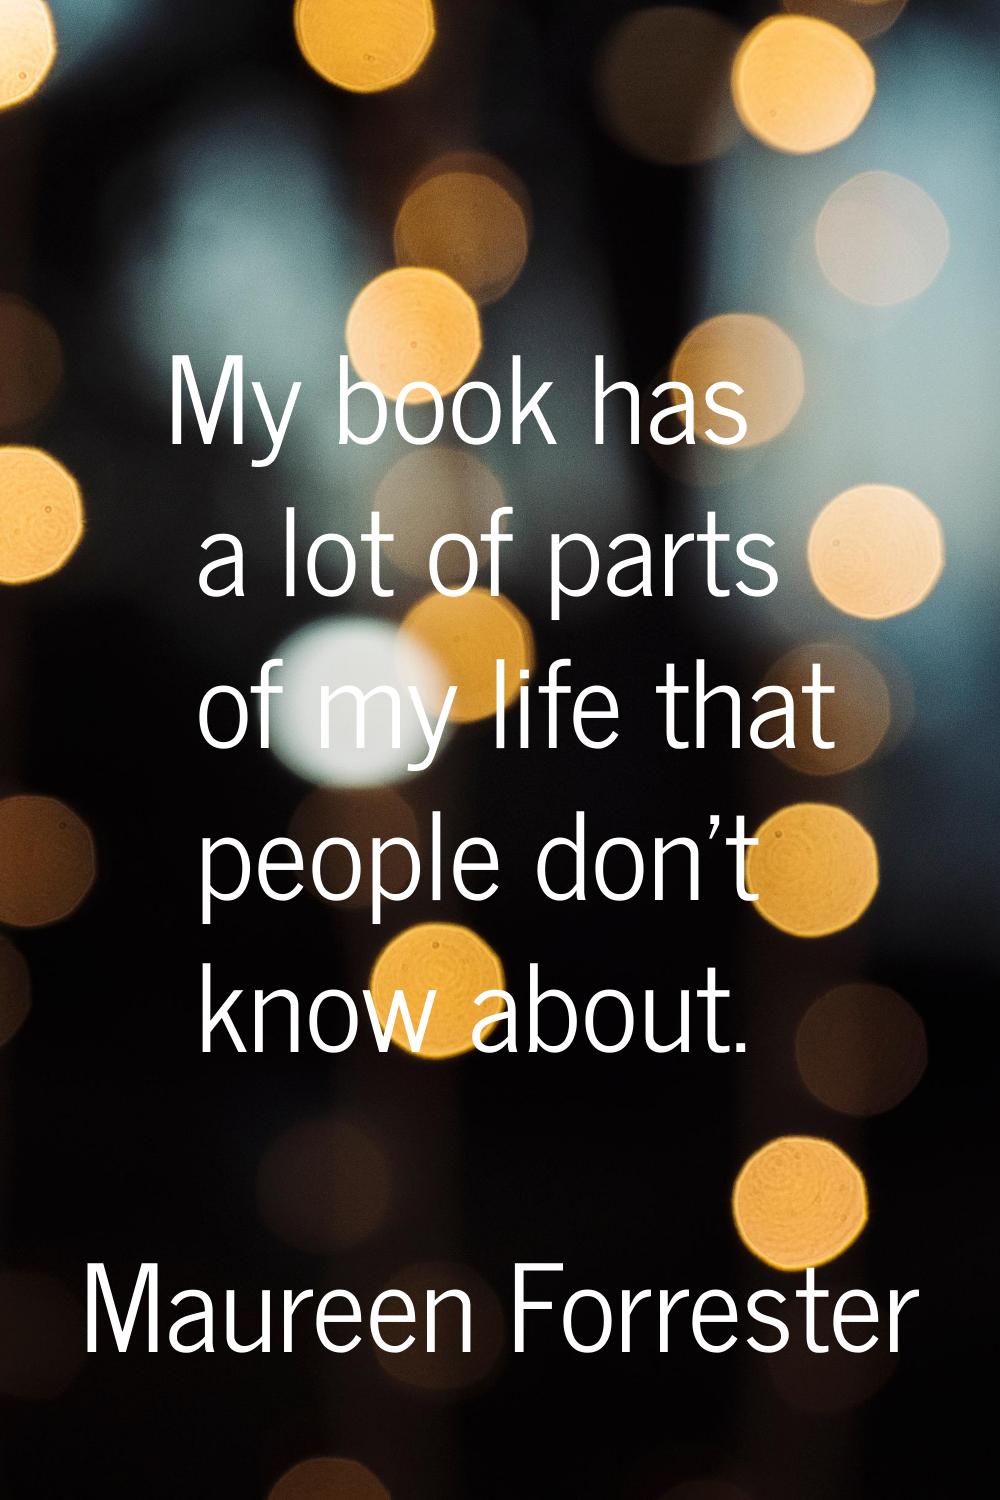 My book has a lot of parts of my life that people don't know about.